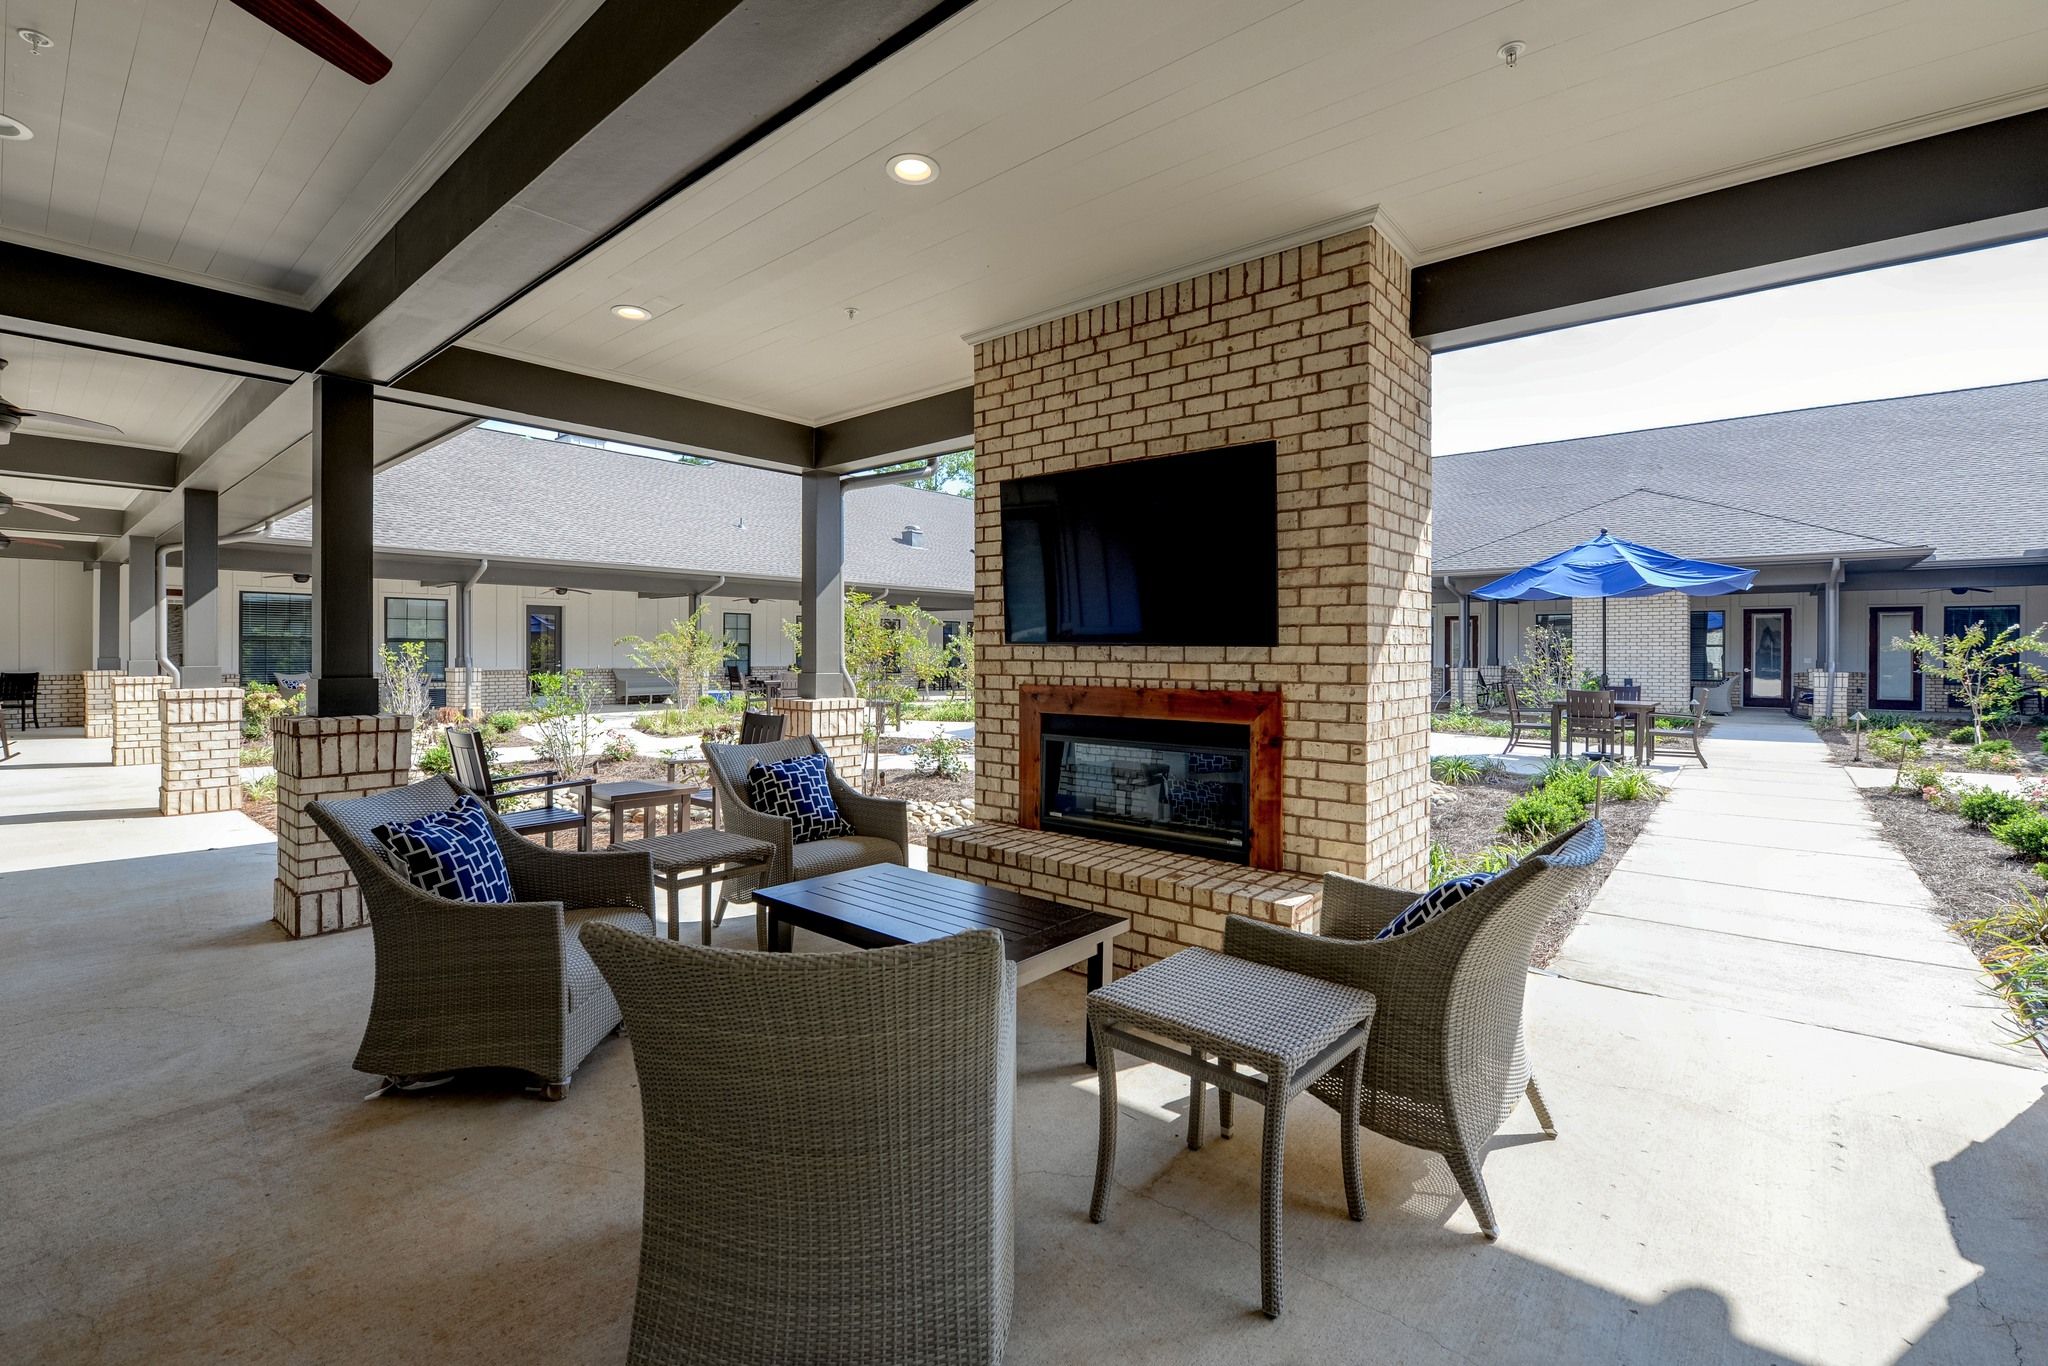 The Preserve at Meridian view of courtyard with fireplace and seating